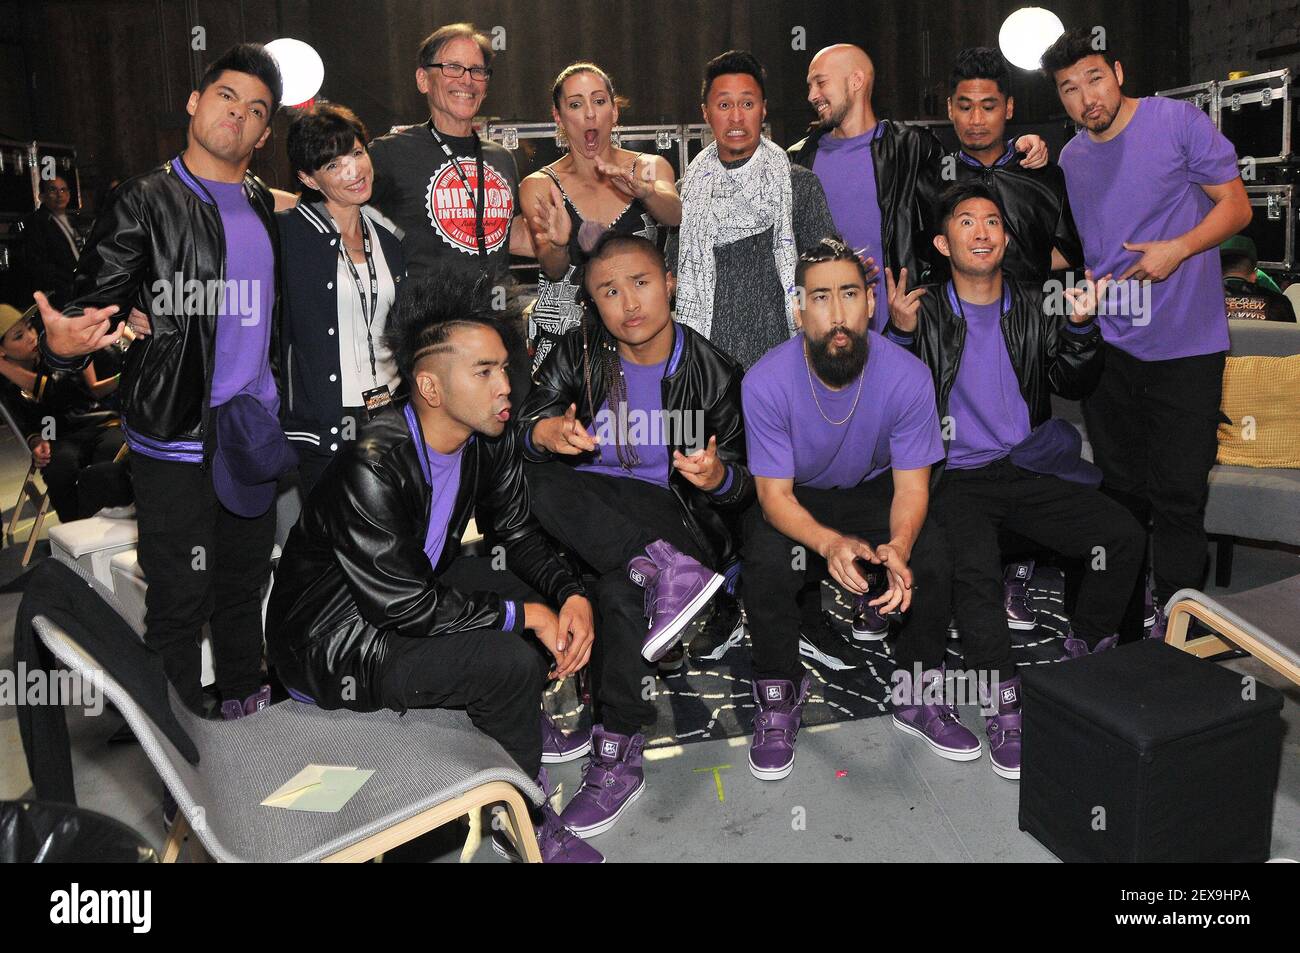 Quest Crew, ABDC Executive Producers/Creators Karen Schwartz and Howard Schwartz & Co-Executive Producer Tabitha D'Umo backstage at the 'America's Best Dance Crew: Road To The VMA's' Finale held at the Warner Bros Lot Stage 19 in Burbank, CA on Saturday, August 29, 2015. (Photo By Sthanlee B. Mirador) *** Please Use Credit from Credit Field *** Stock Photo